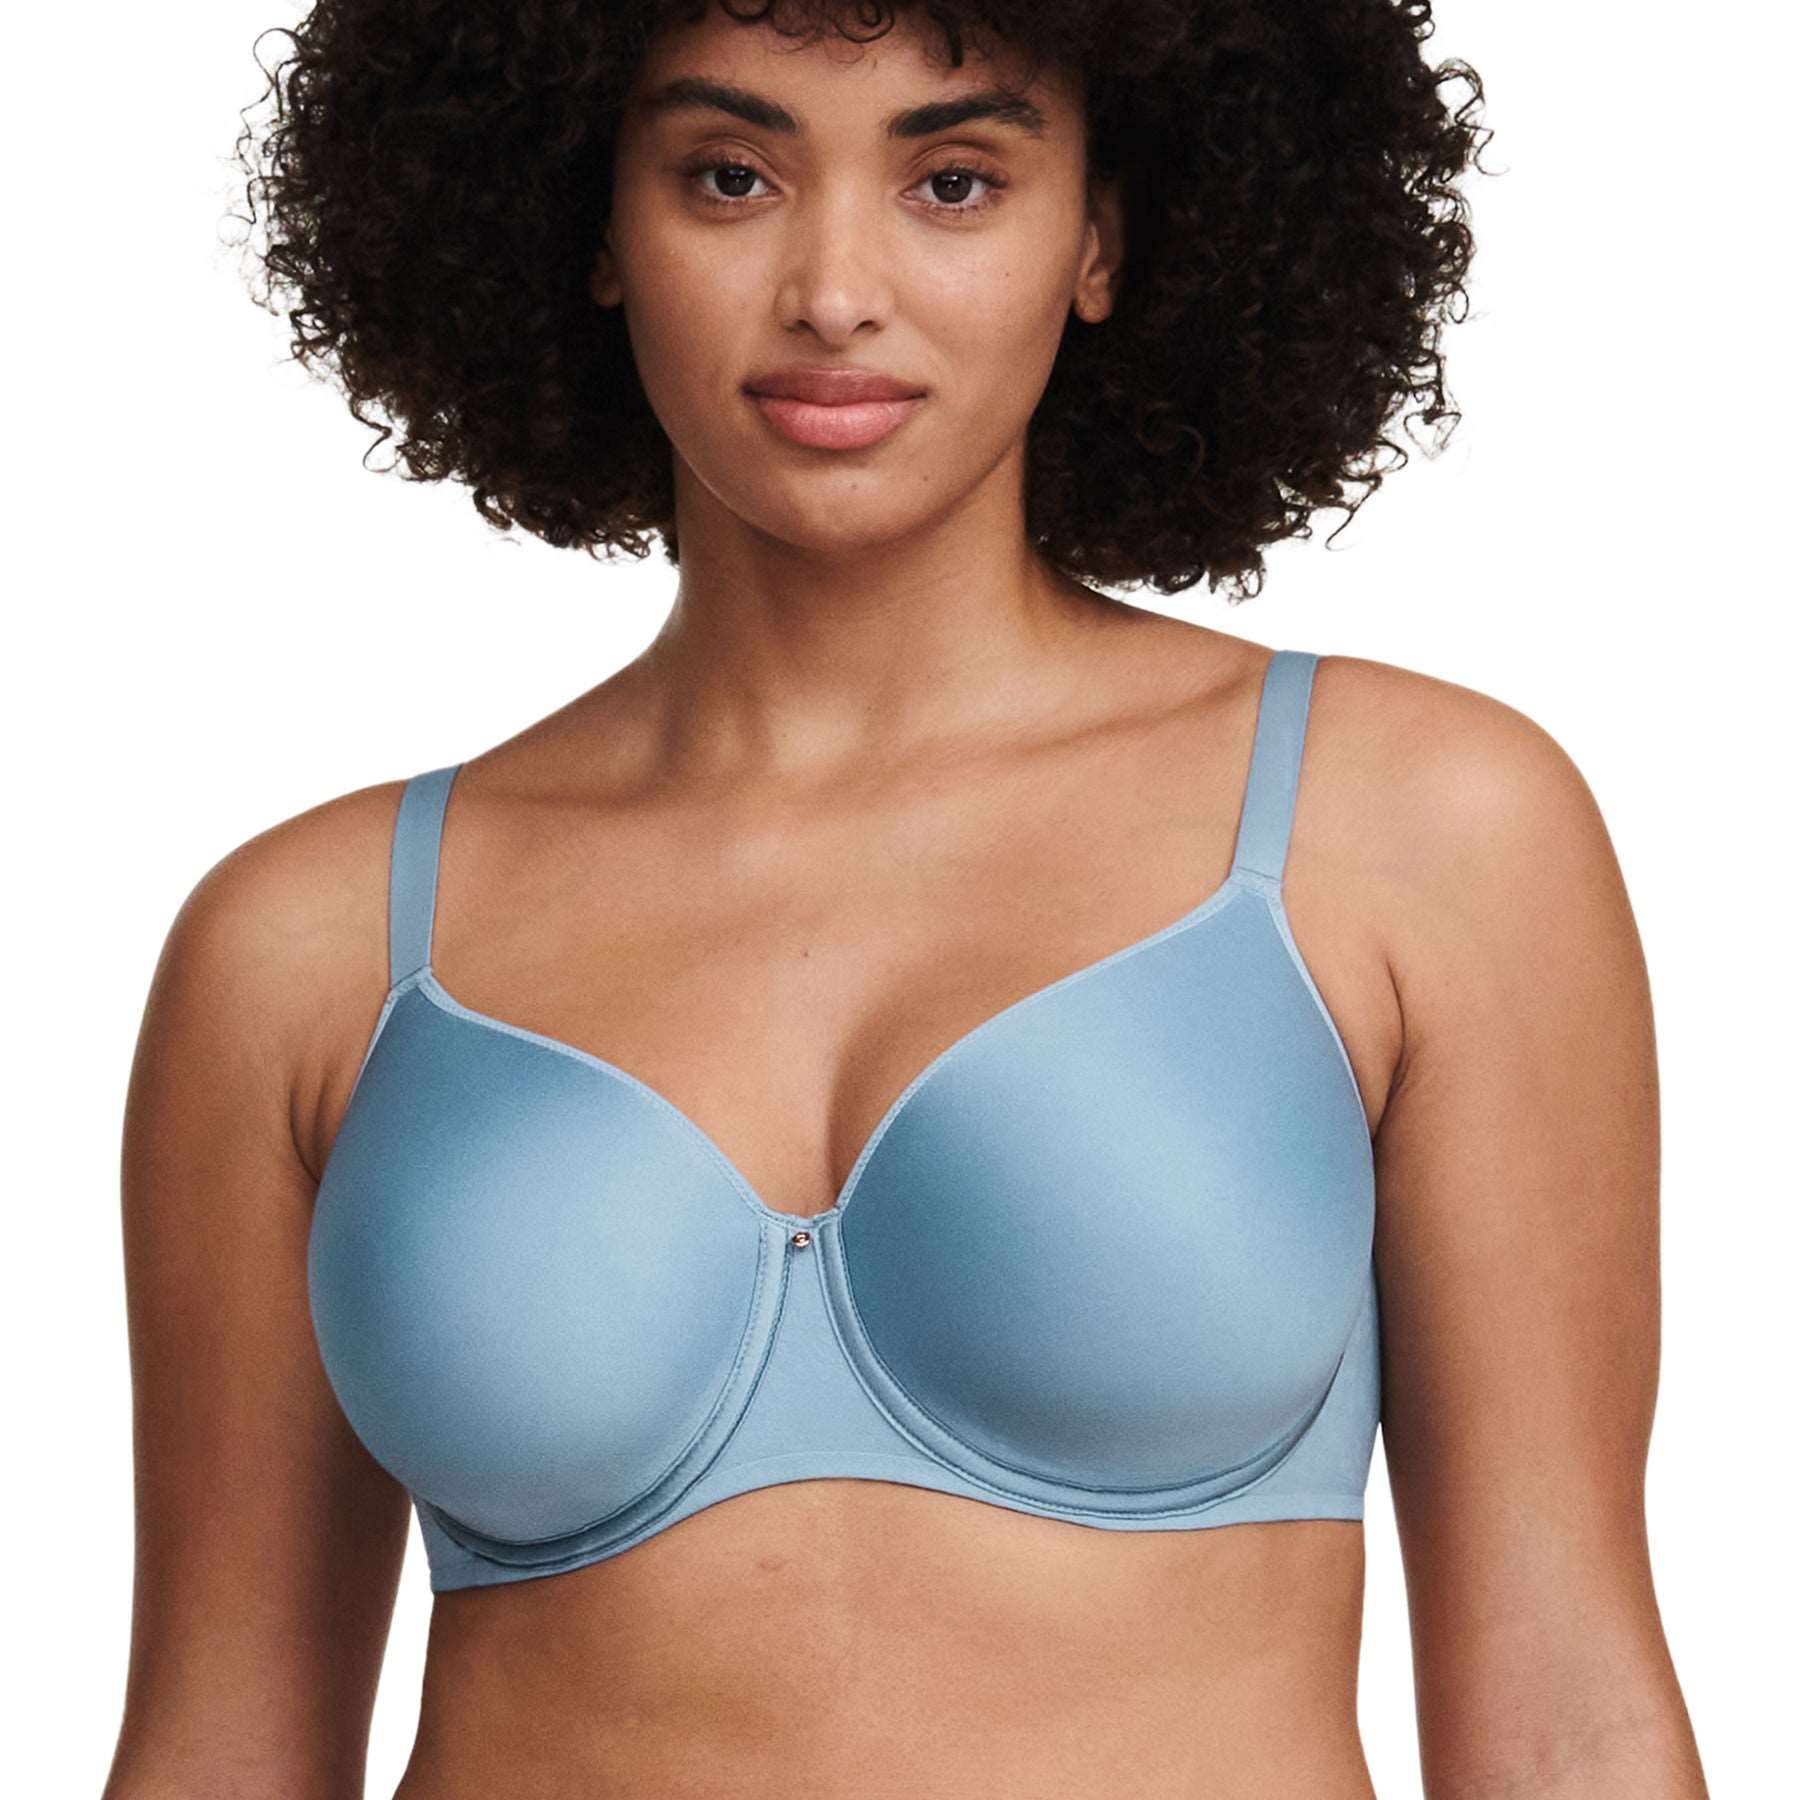 CLEARANCE SALE 2x BWITCH LADIES WOMEN'S UNDERWIRED T-SHIRT BRA